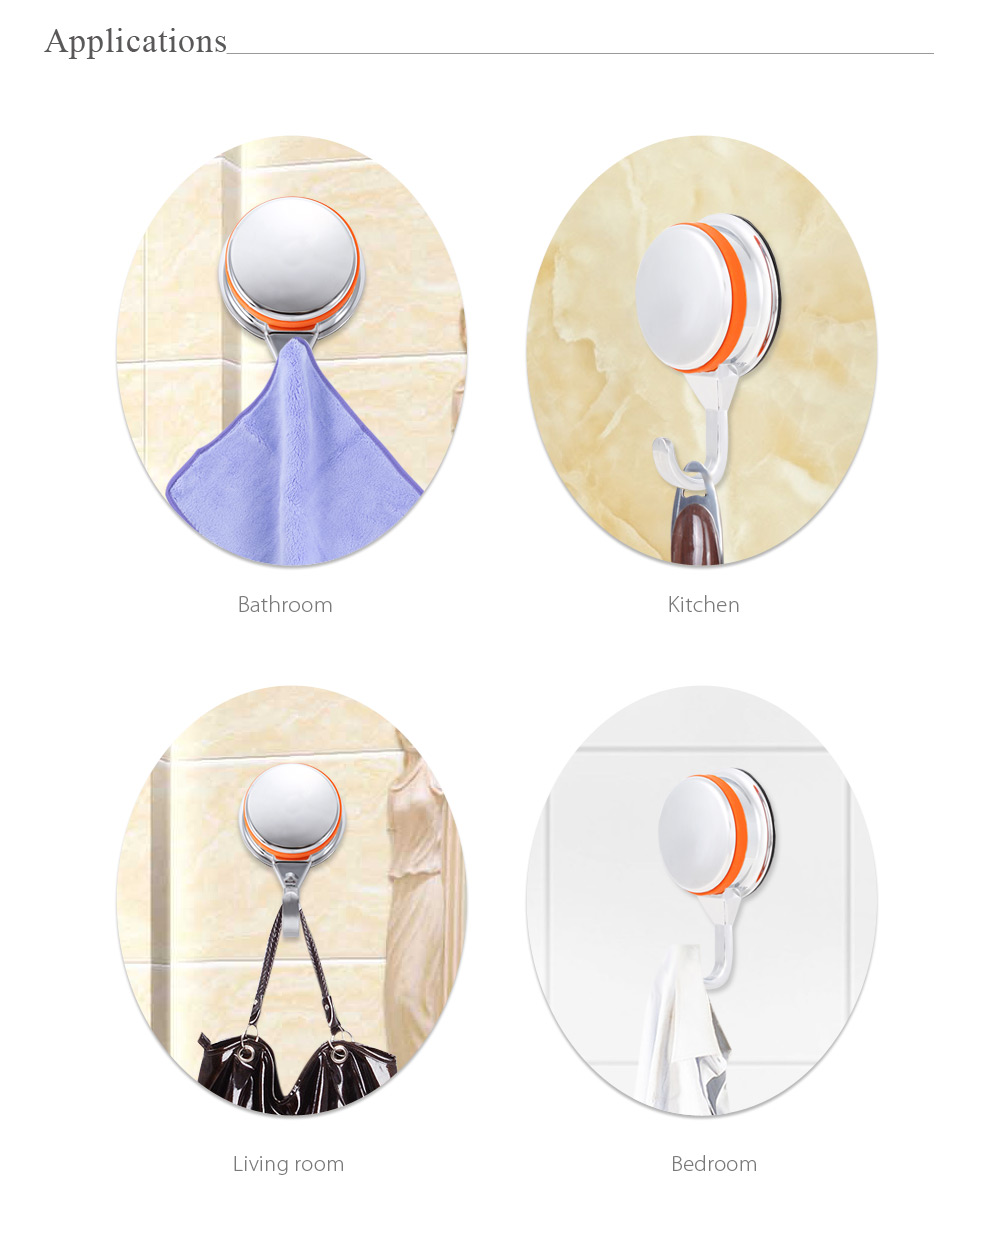 Removable Strong Vacuum Suction Cup Hook Holder for Towel Bathrobe